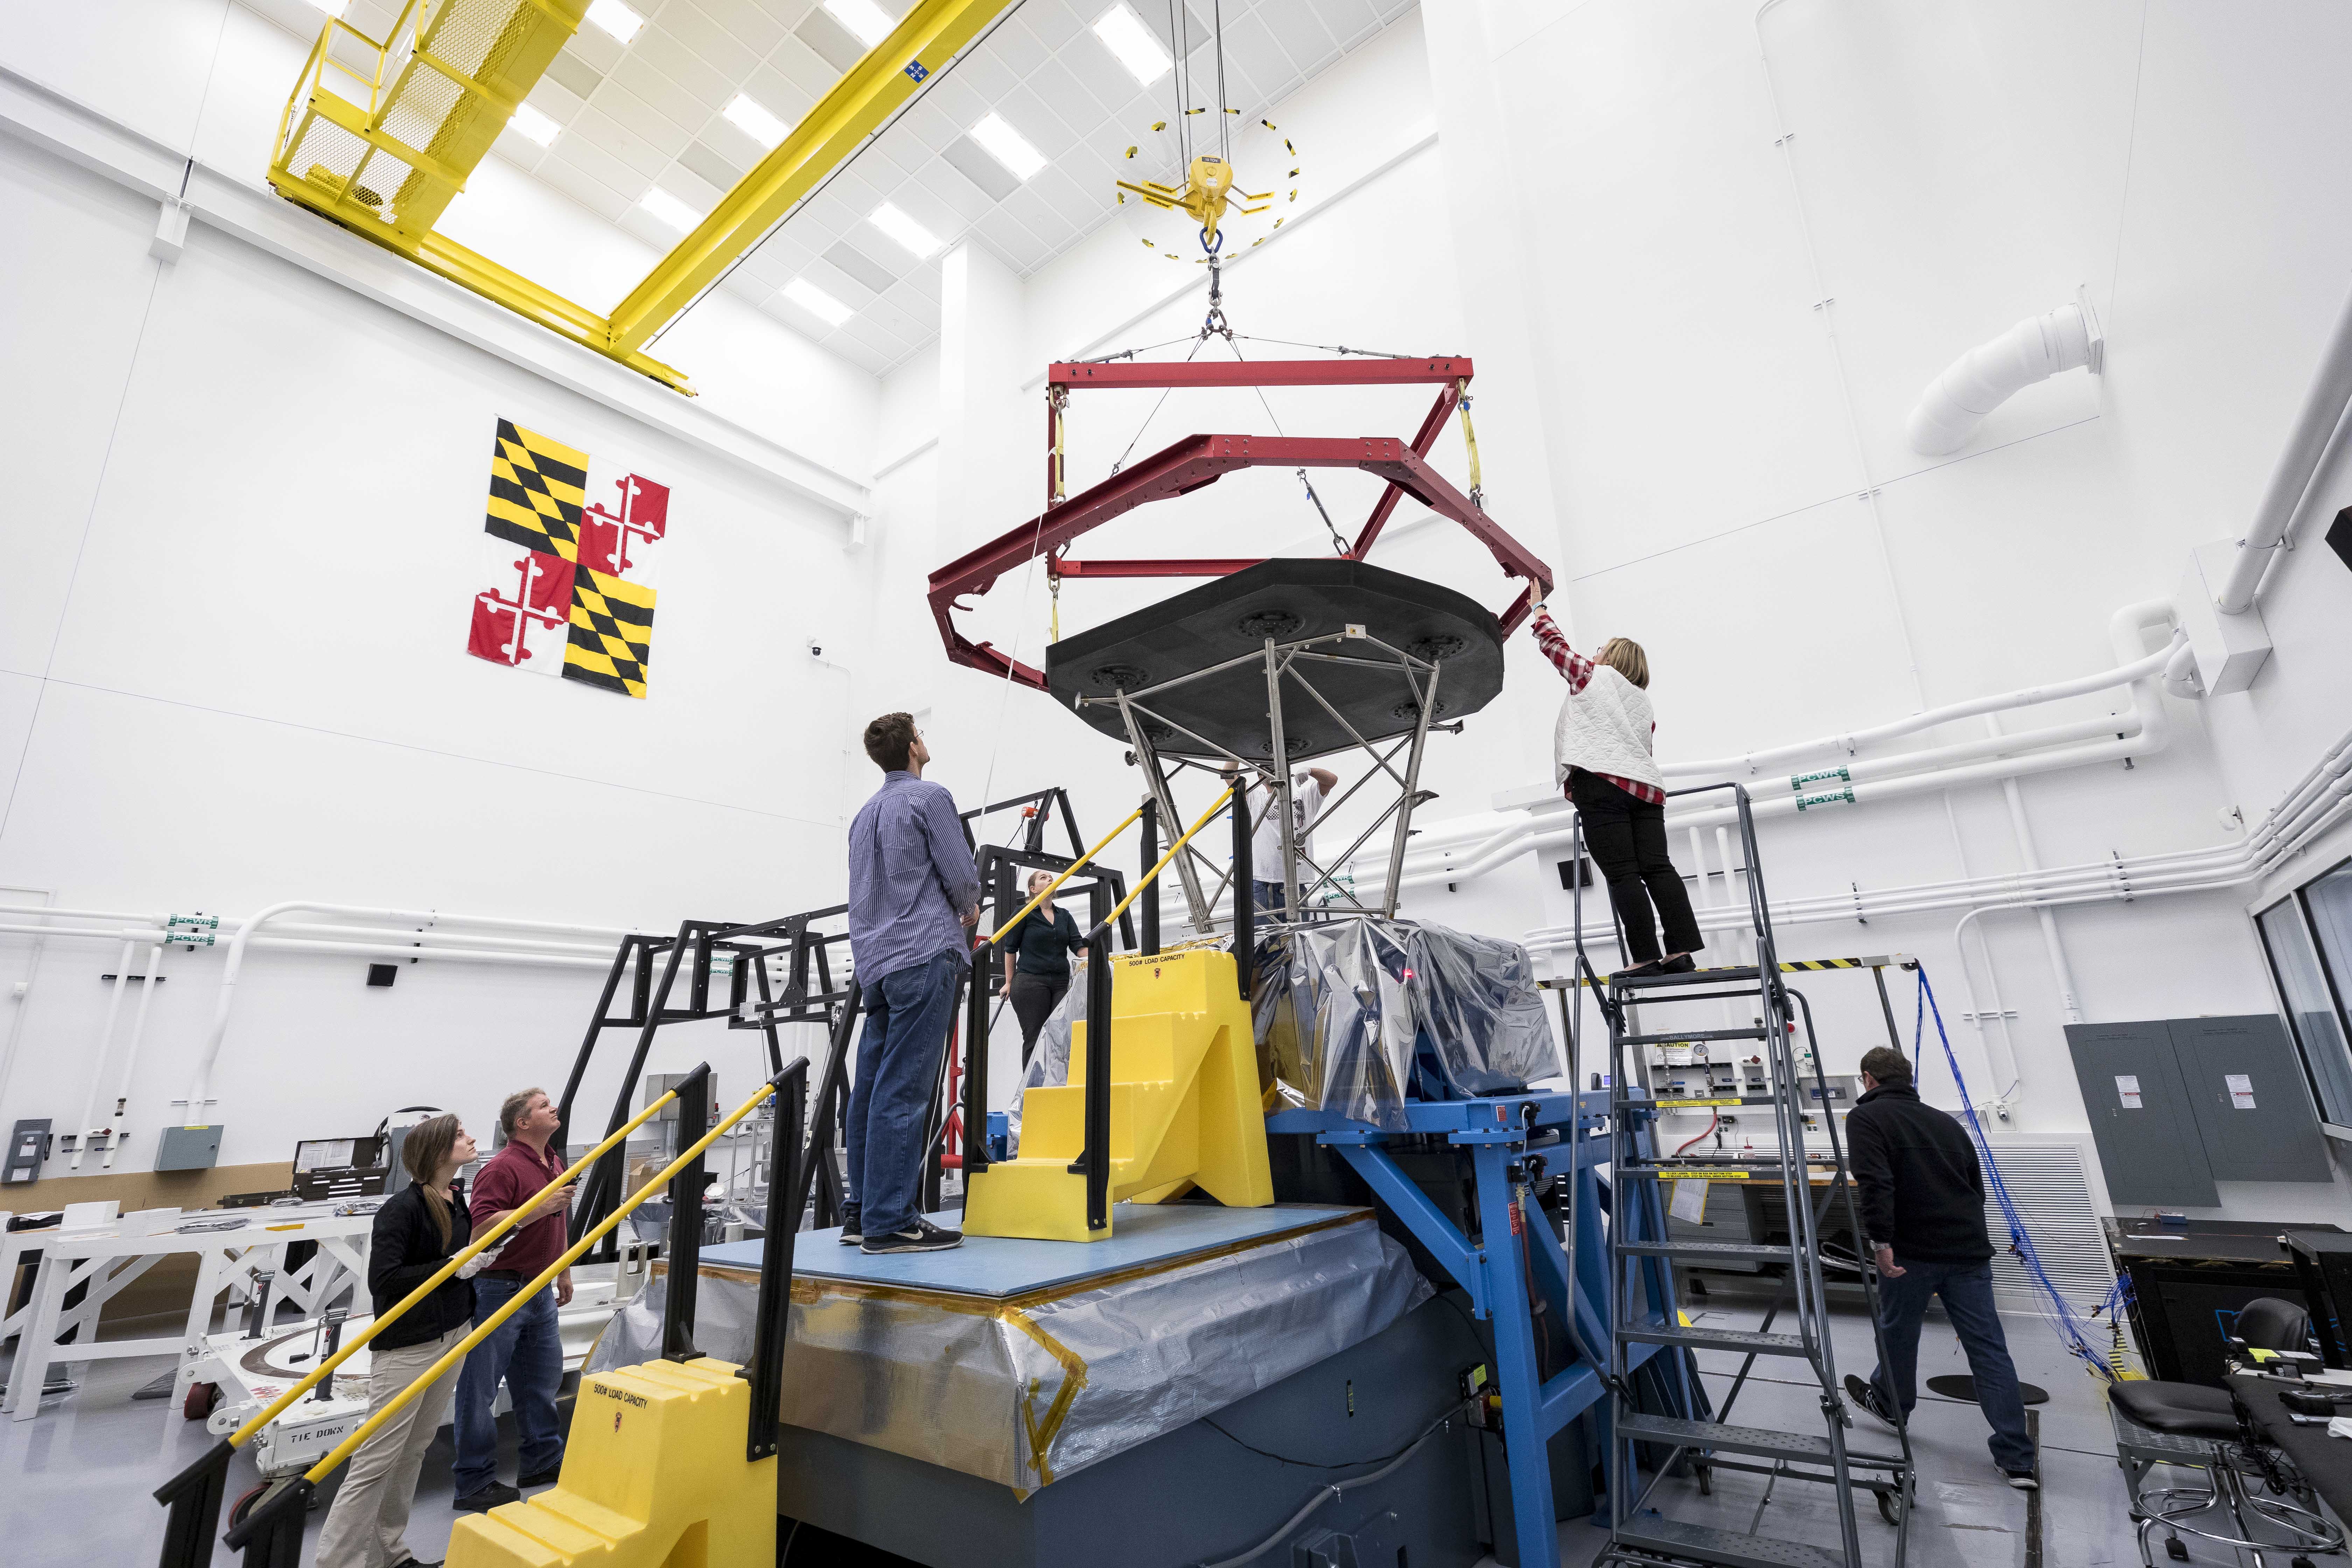 The Parker Solar Probe team at Johns Hopkins APL prepares to lift the heat shield, called the Thermal Protection System (TPS), in preparation for shipment to NASA's Goddard Space Flight Center for further environmental testing.